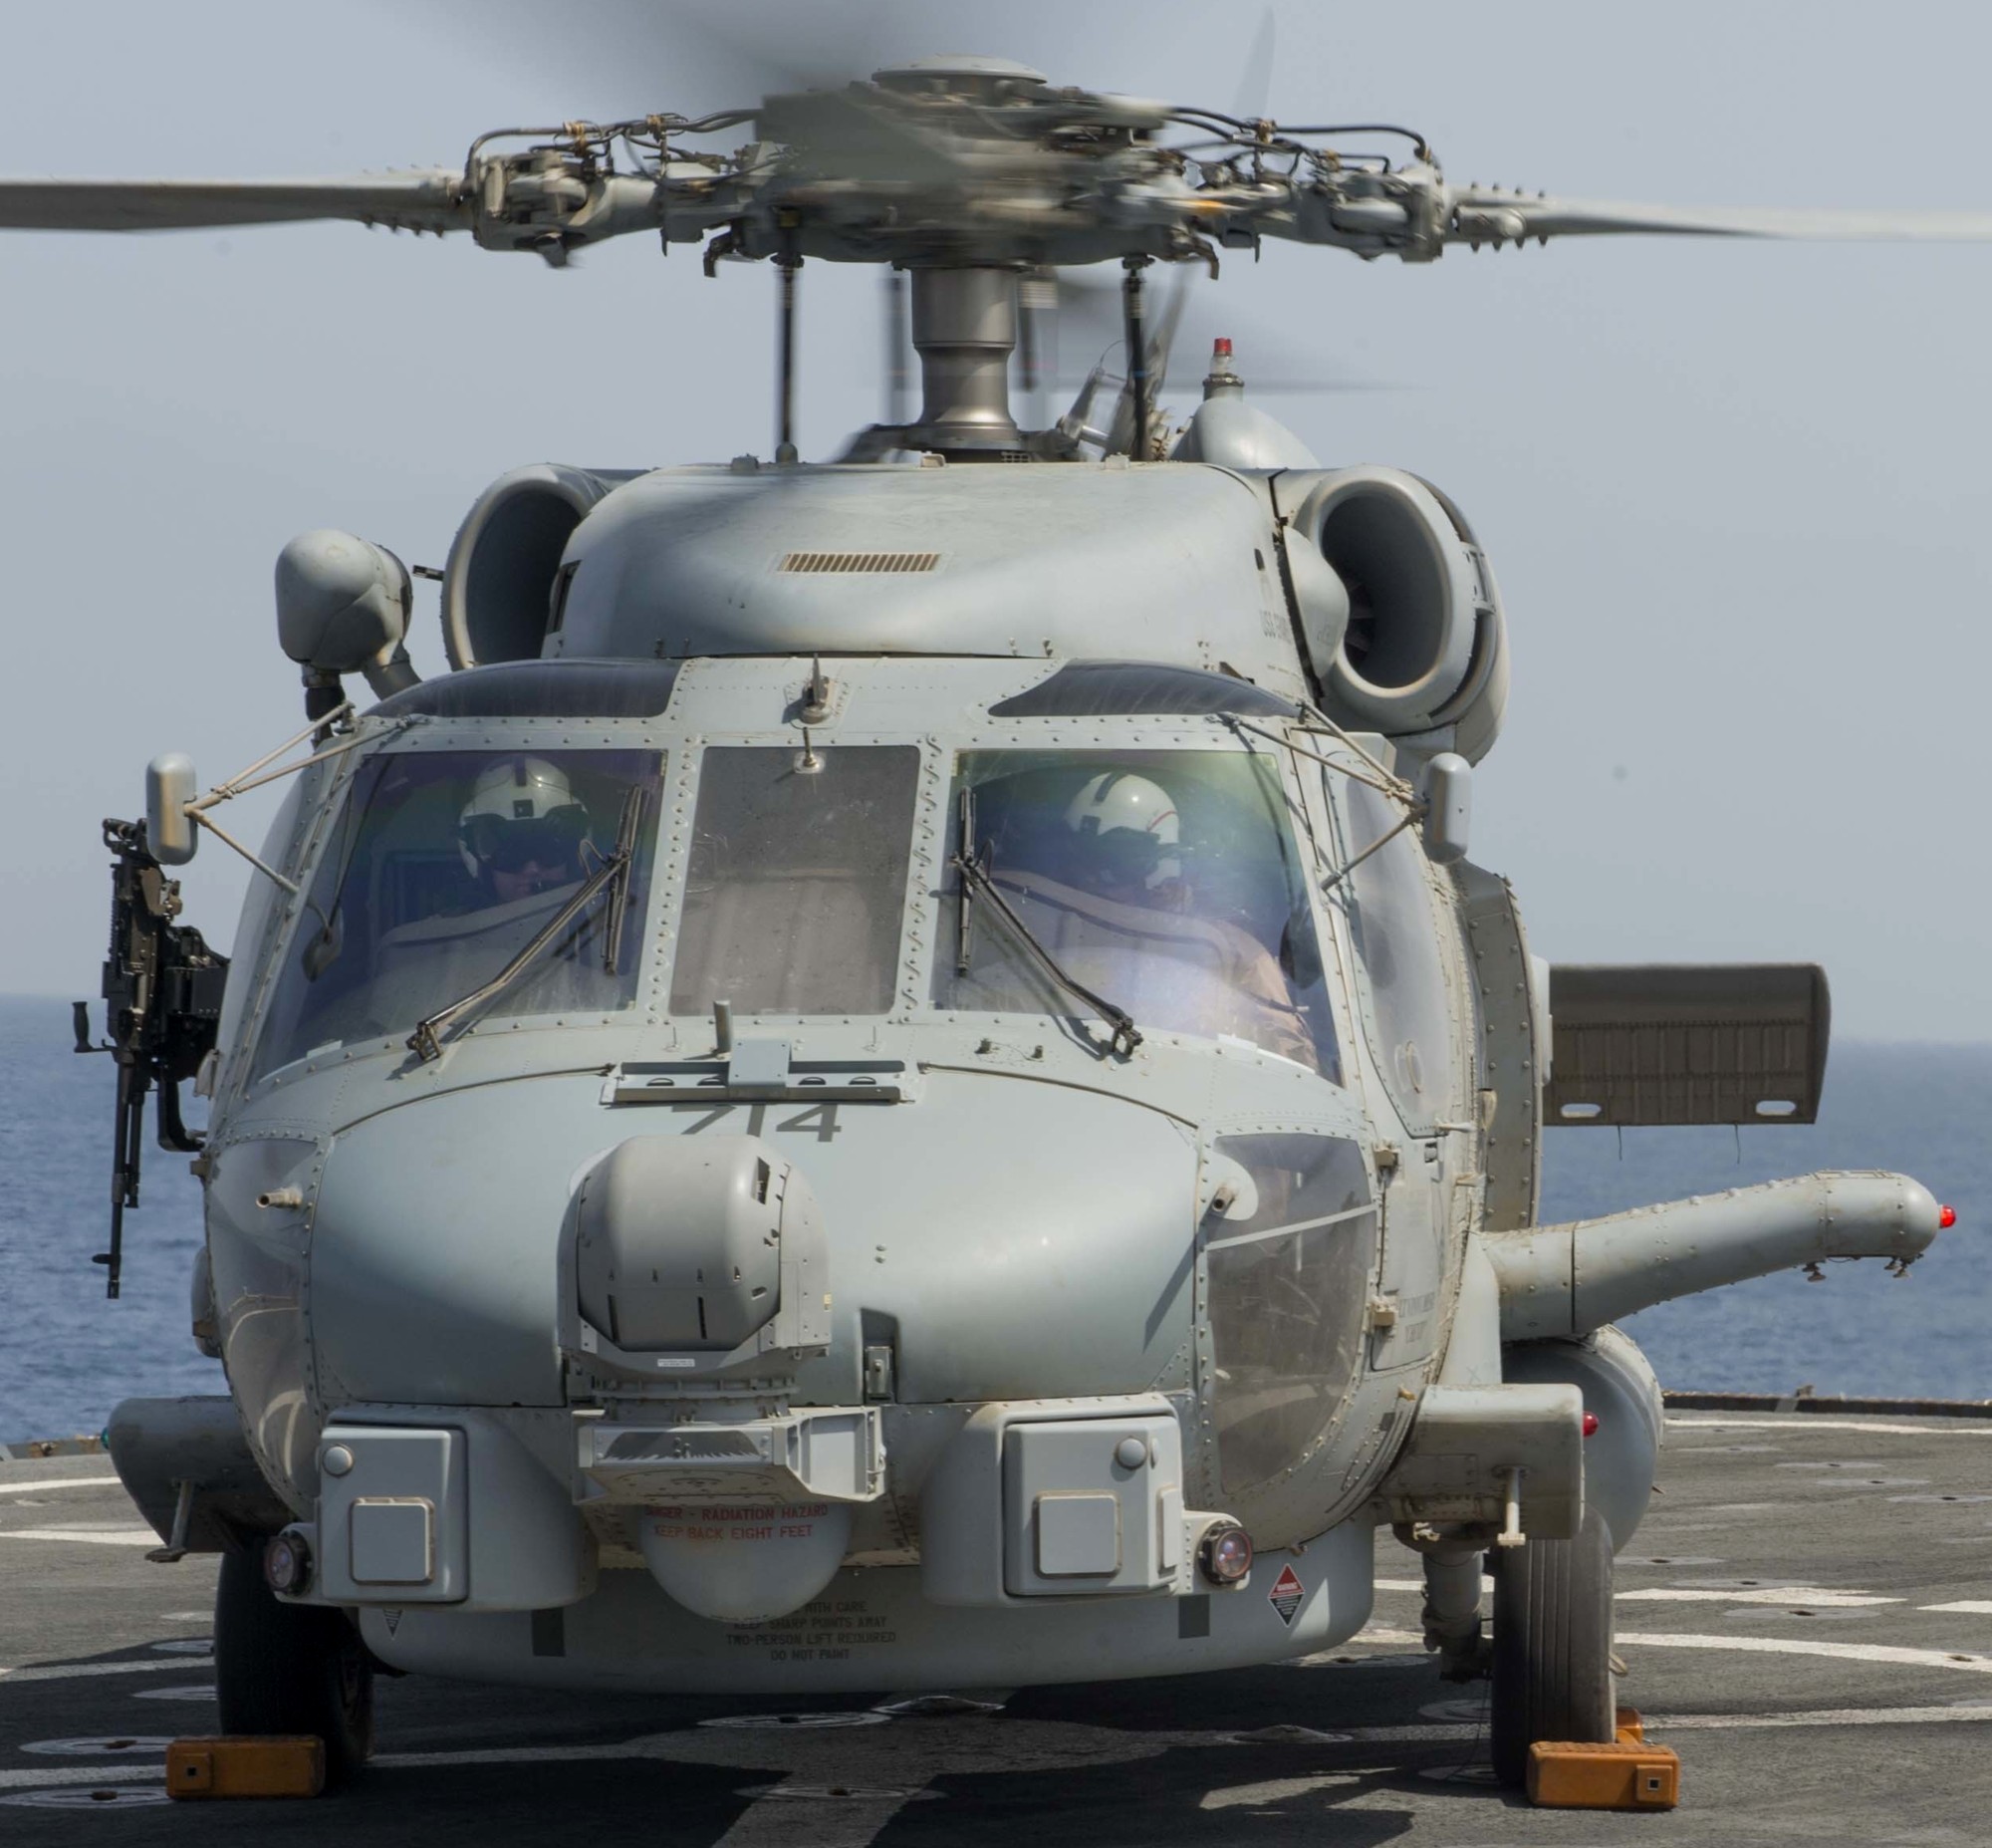 hsm-72 proud warriors helicopter maritime strike squadron us navy mh-60r seahawk 2014 26 uss harpers ferry lsd-49